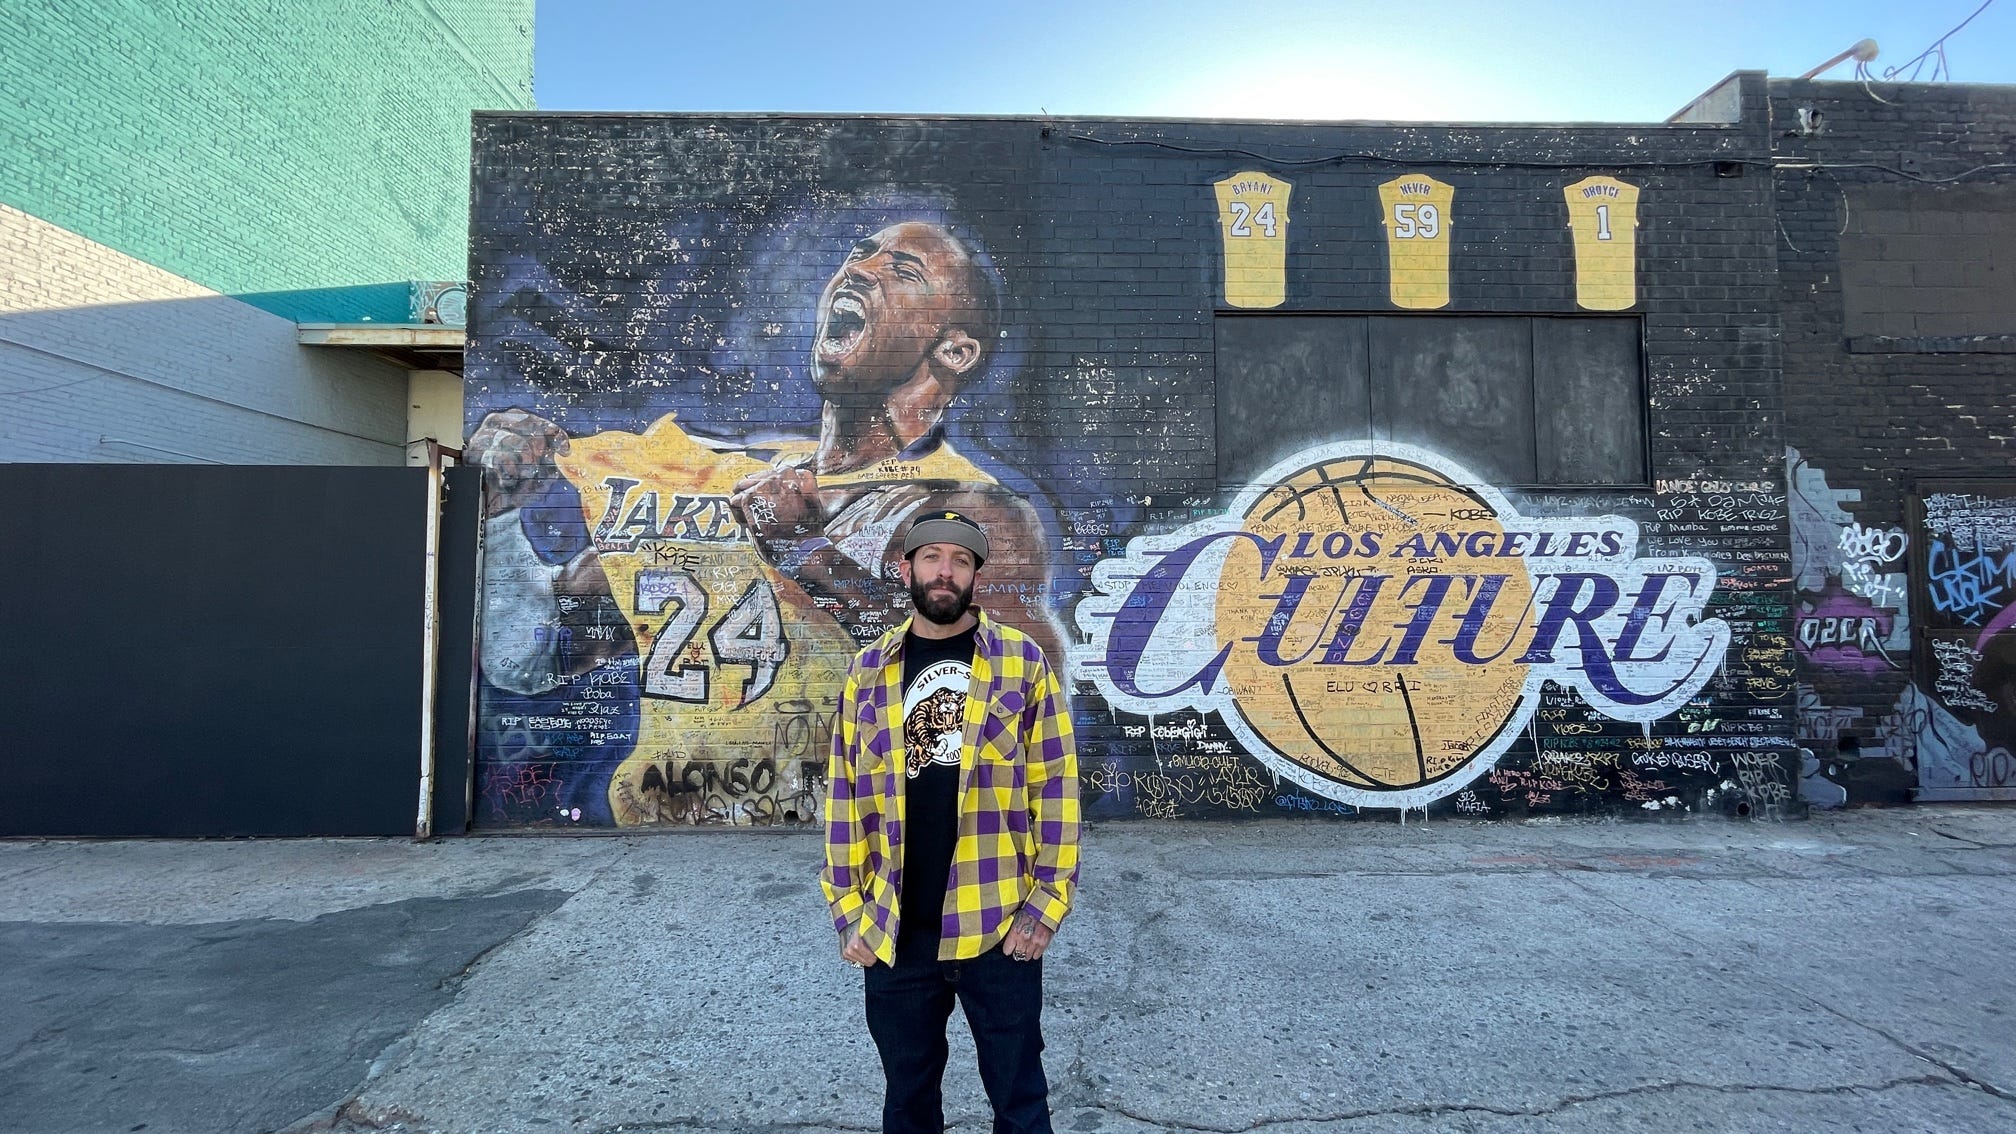 Last Piece Of Famous Kobe Bryant Mural Appraised At $200,000